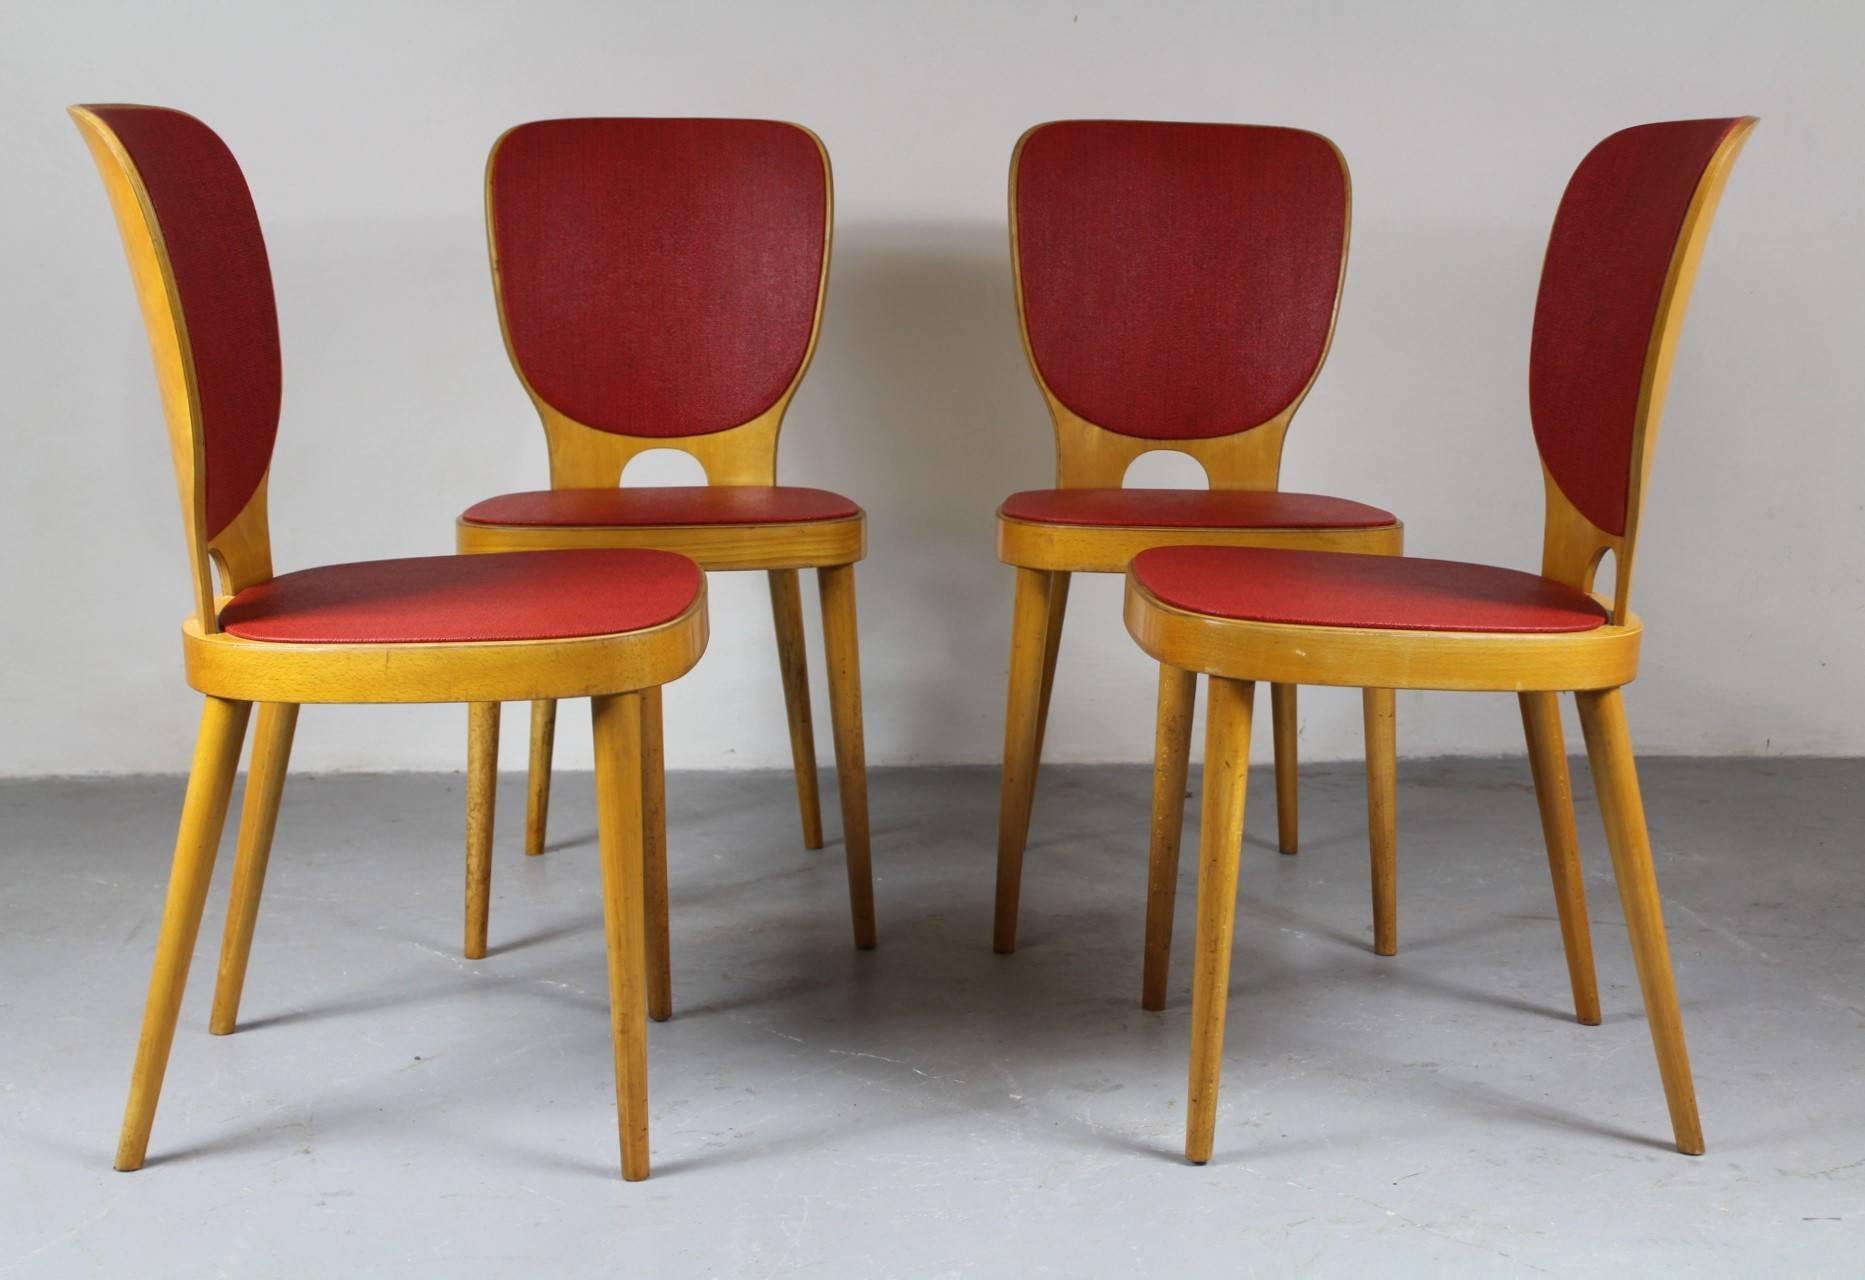 Set of four chairs designed by Max Bill in 1952, manufactured by Horgen Glarus, Switzerland.

Lit. Domus 1950 - 1954 vol. III, Eds. Ch. and P. Fiell, pg. 345